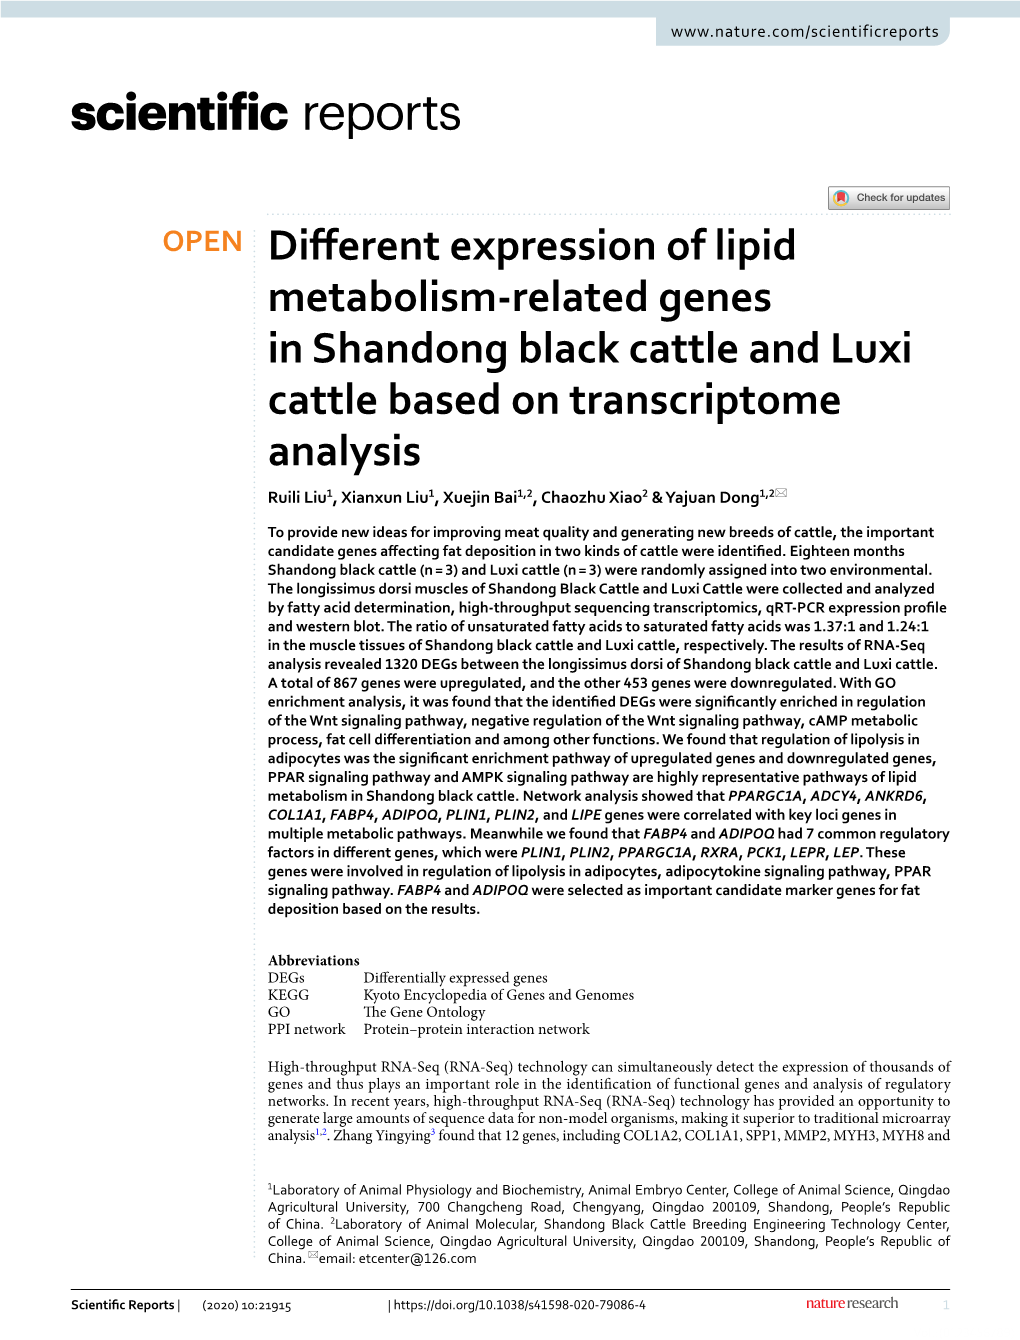 Different Expression of Lipid Metabolism-Related Genes In